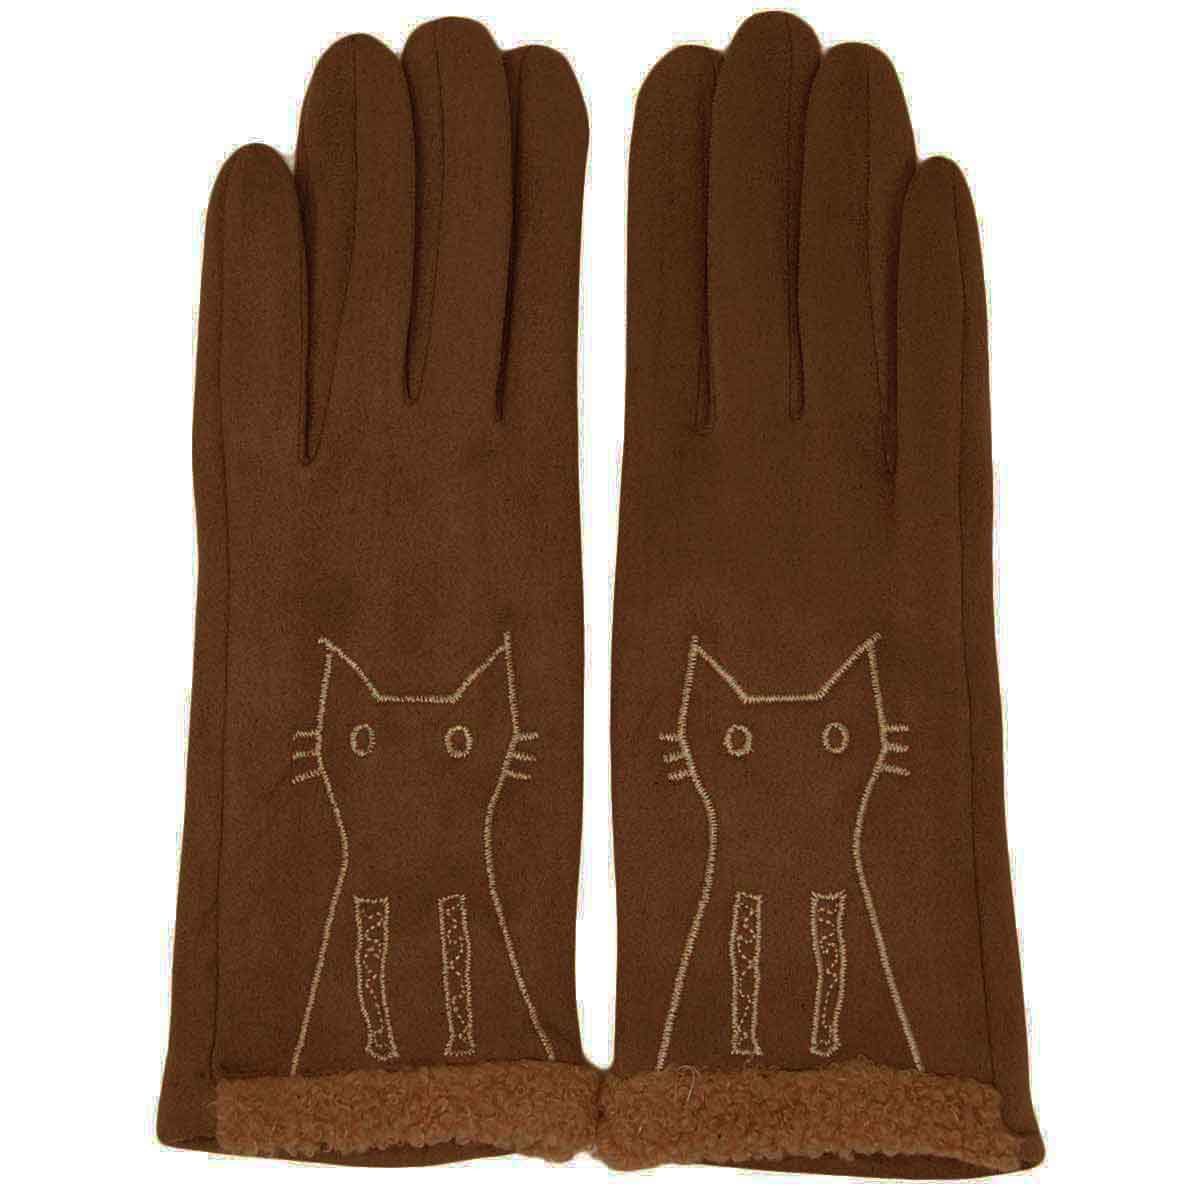 1224 - Brown Cat Silhouette<br>
Touch Screen Smart Gloves